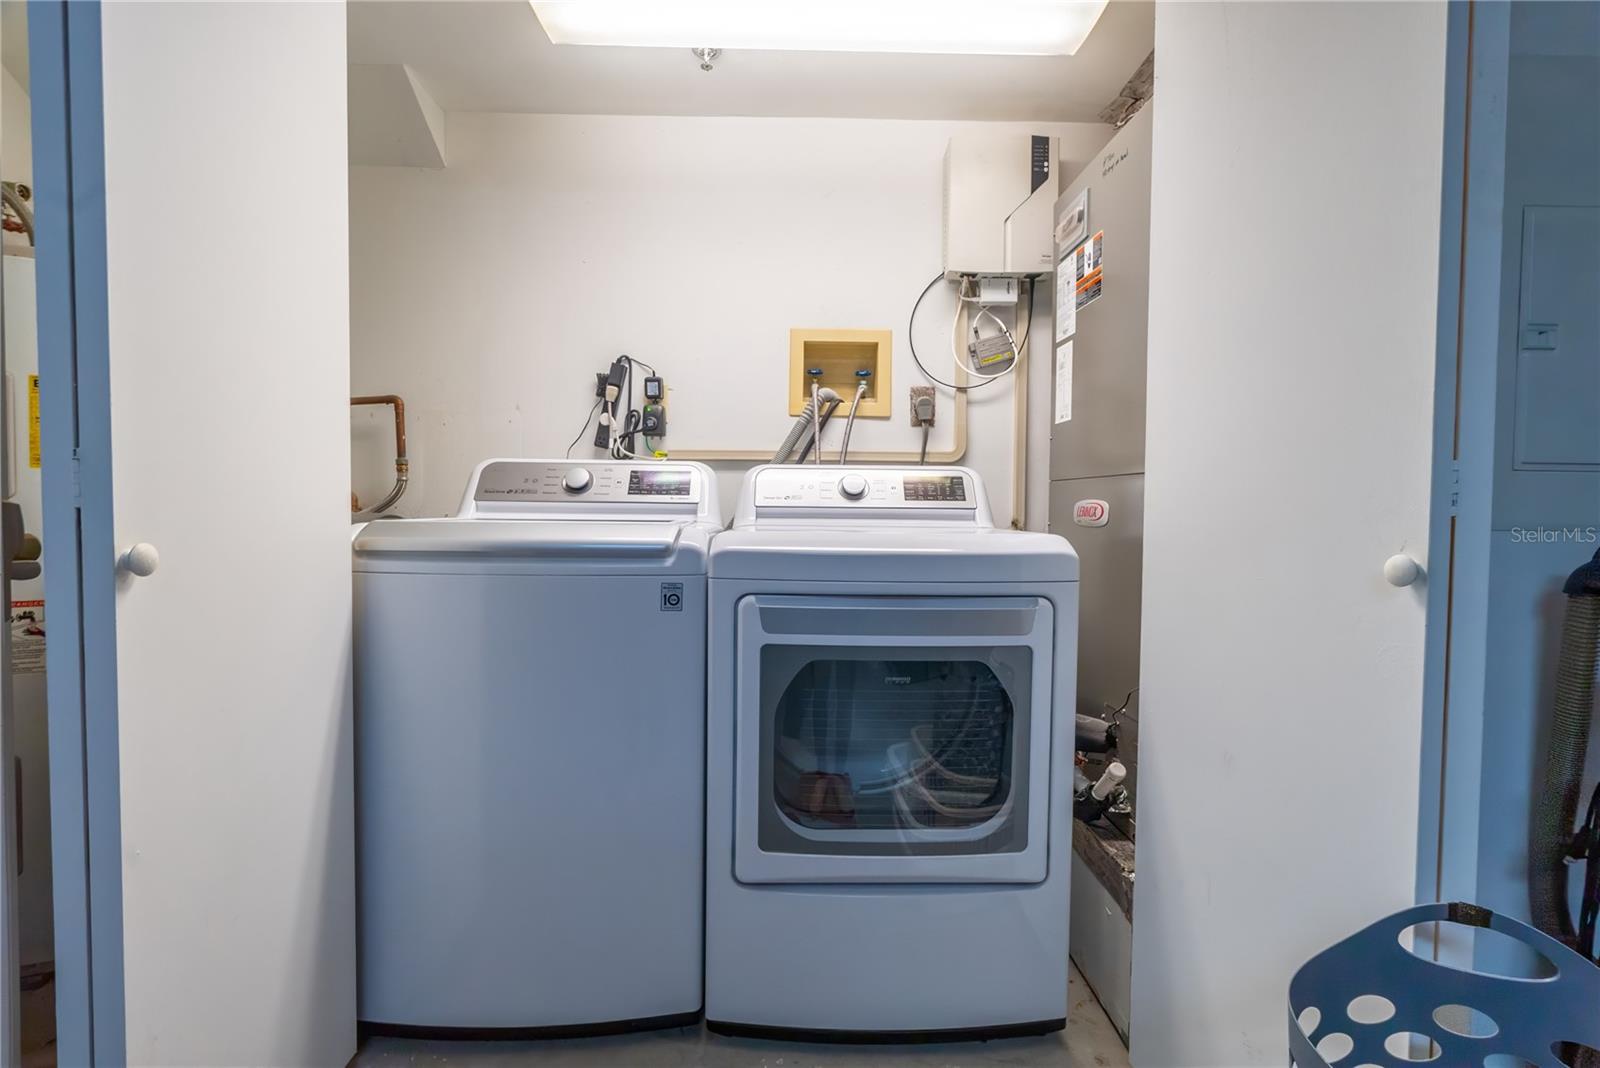 This washer and dryer will convey. They are tucked away in the garage.